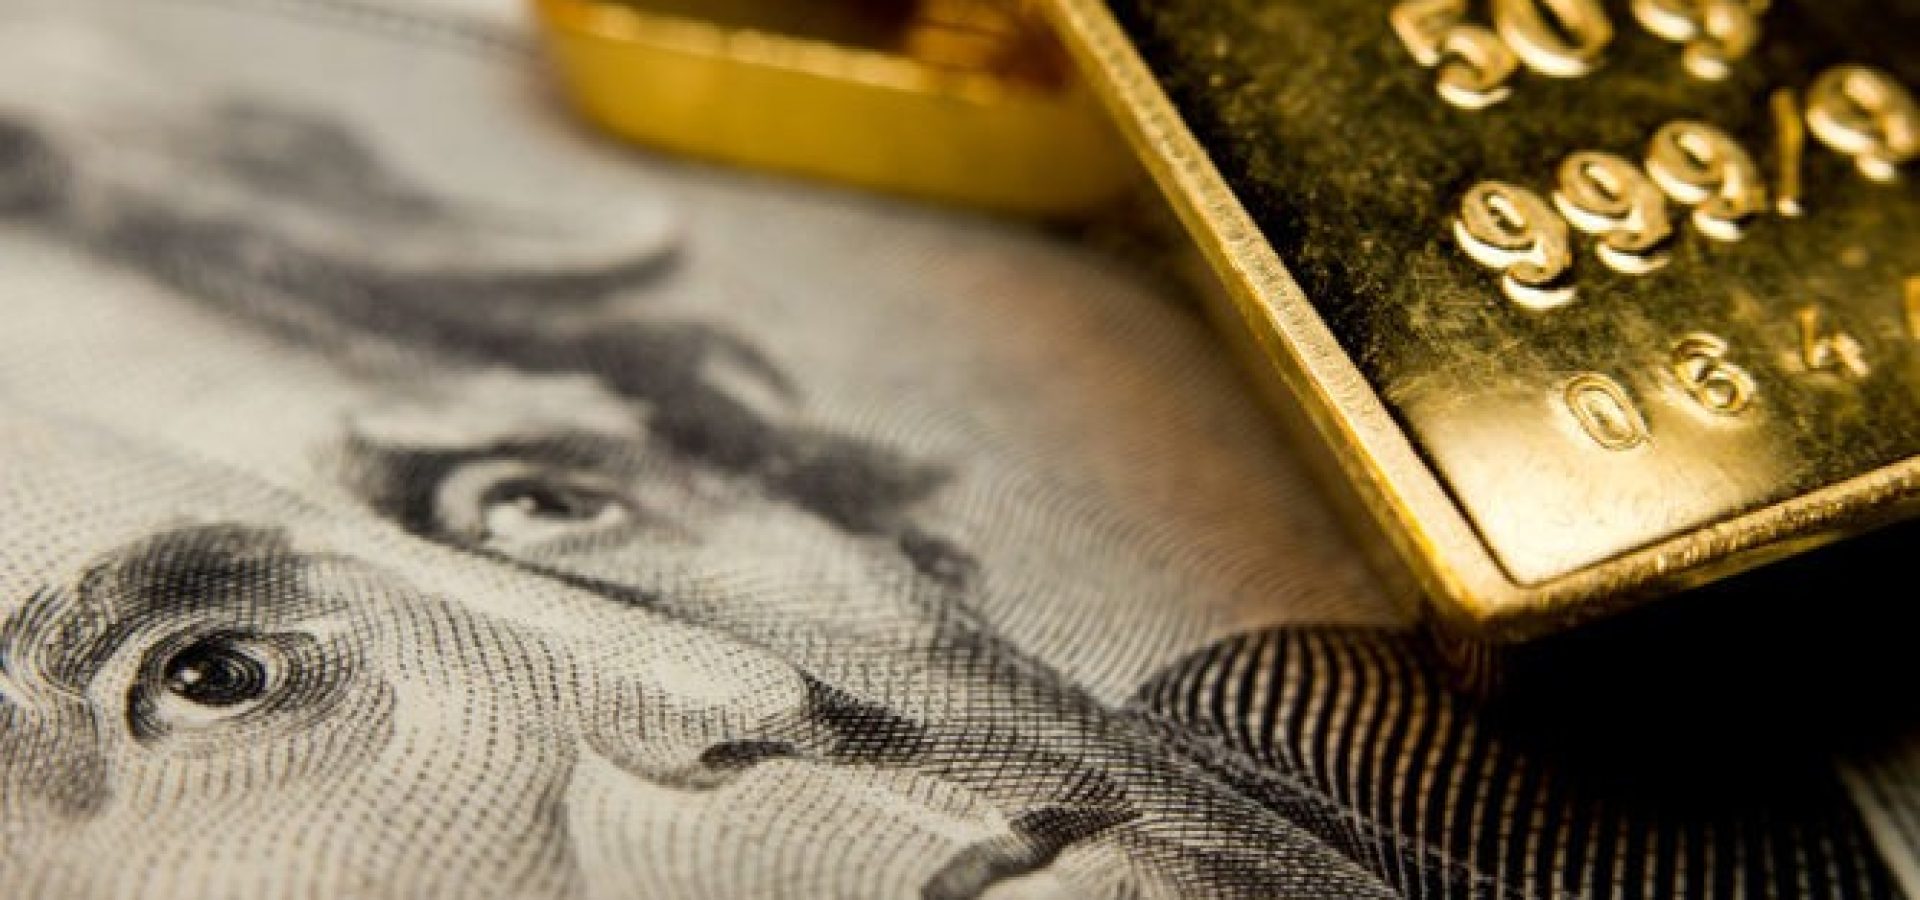 Wibest – Spot Gold Price: Gold bars on top or a US dollar bill.